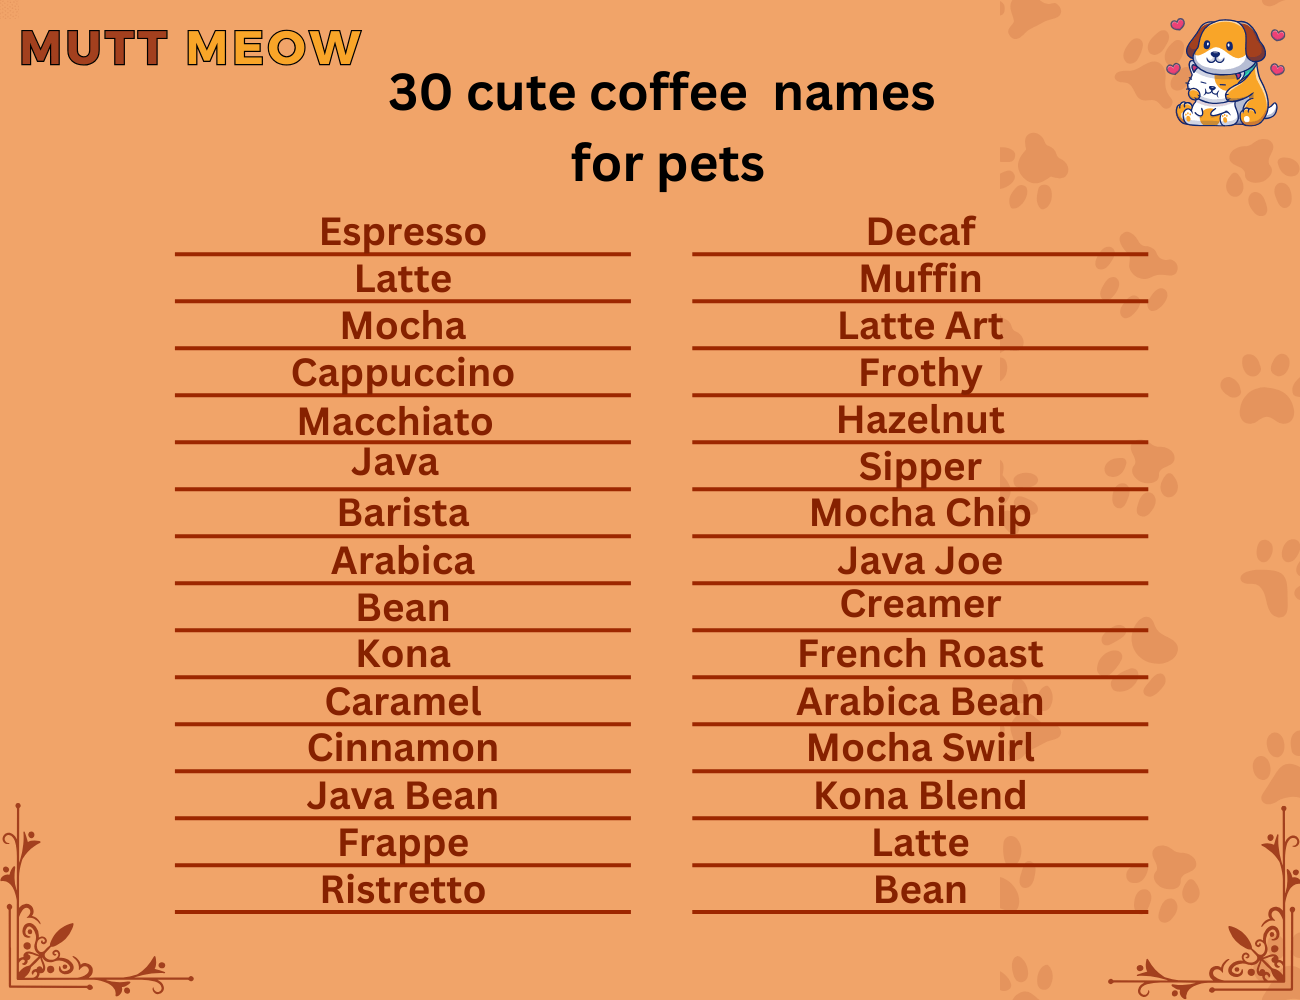 30 cute coffee names for pets